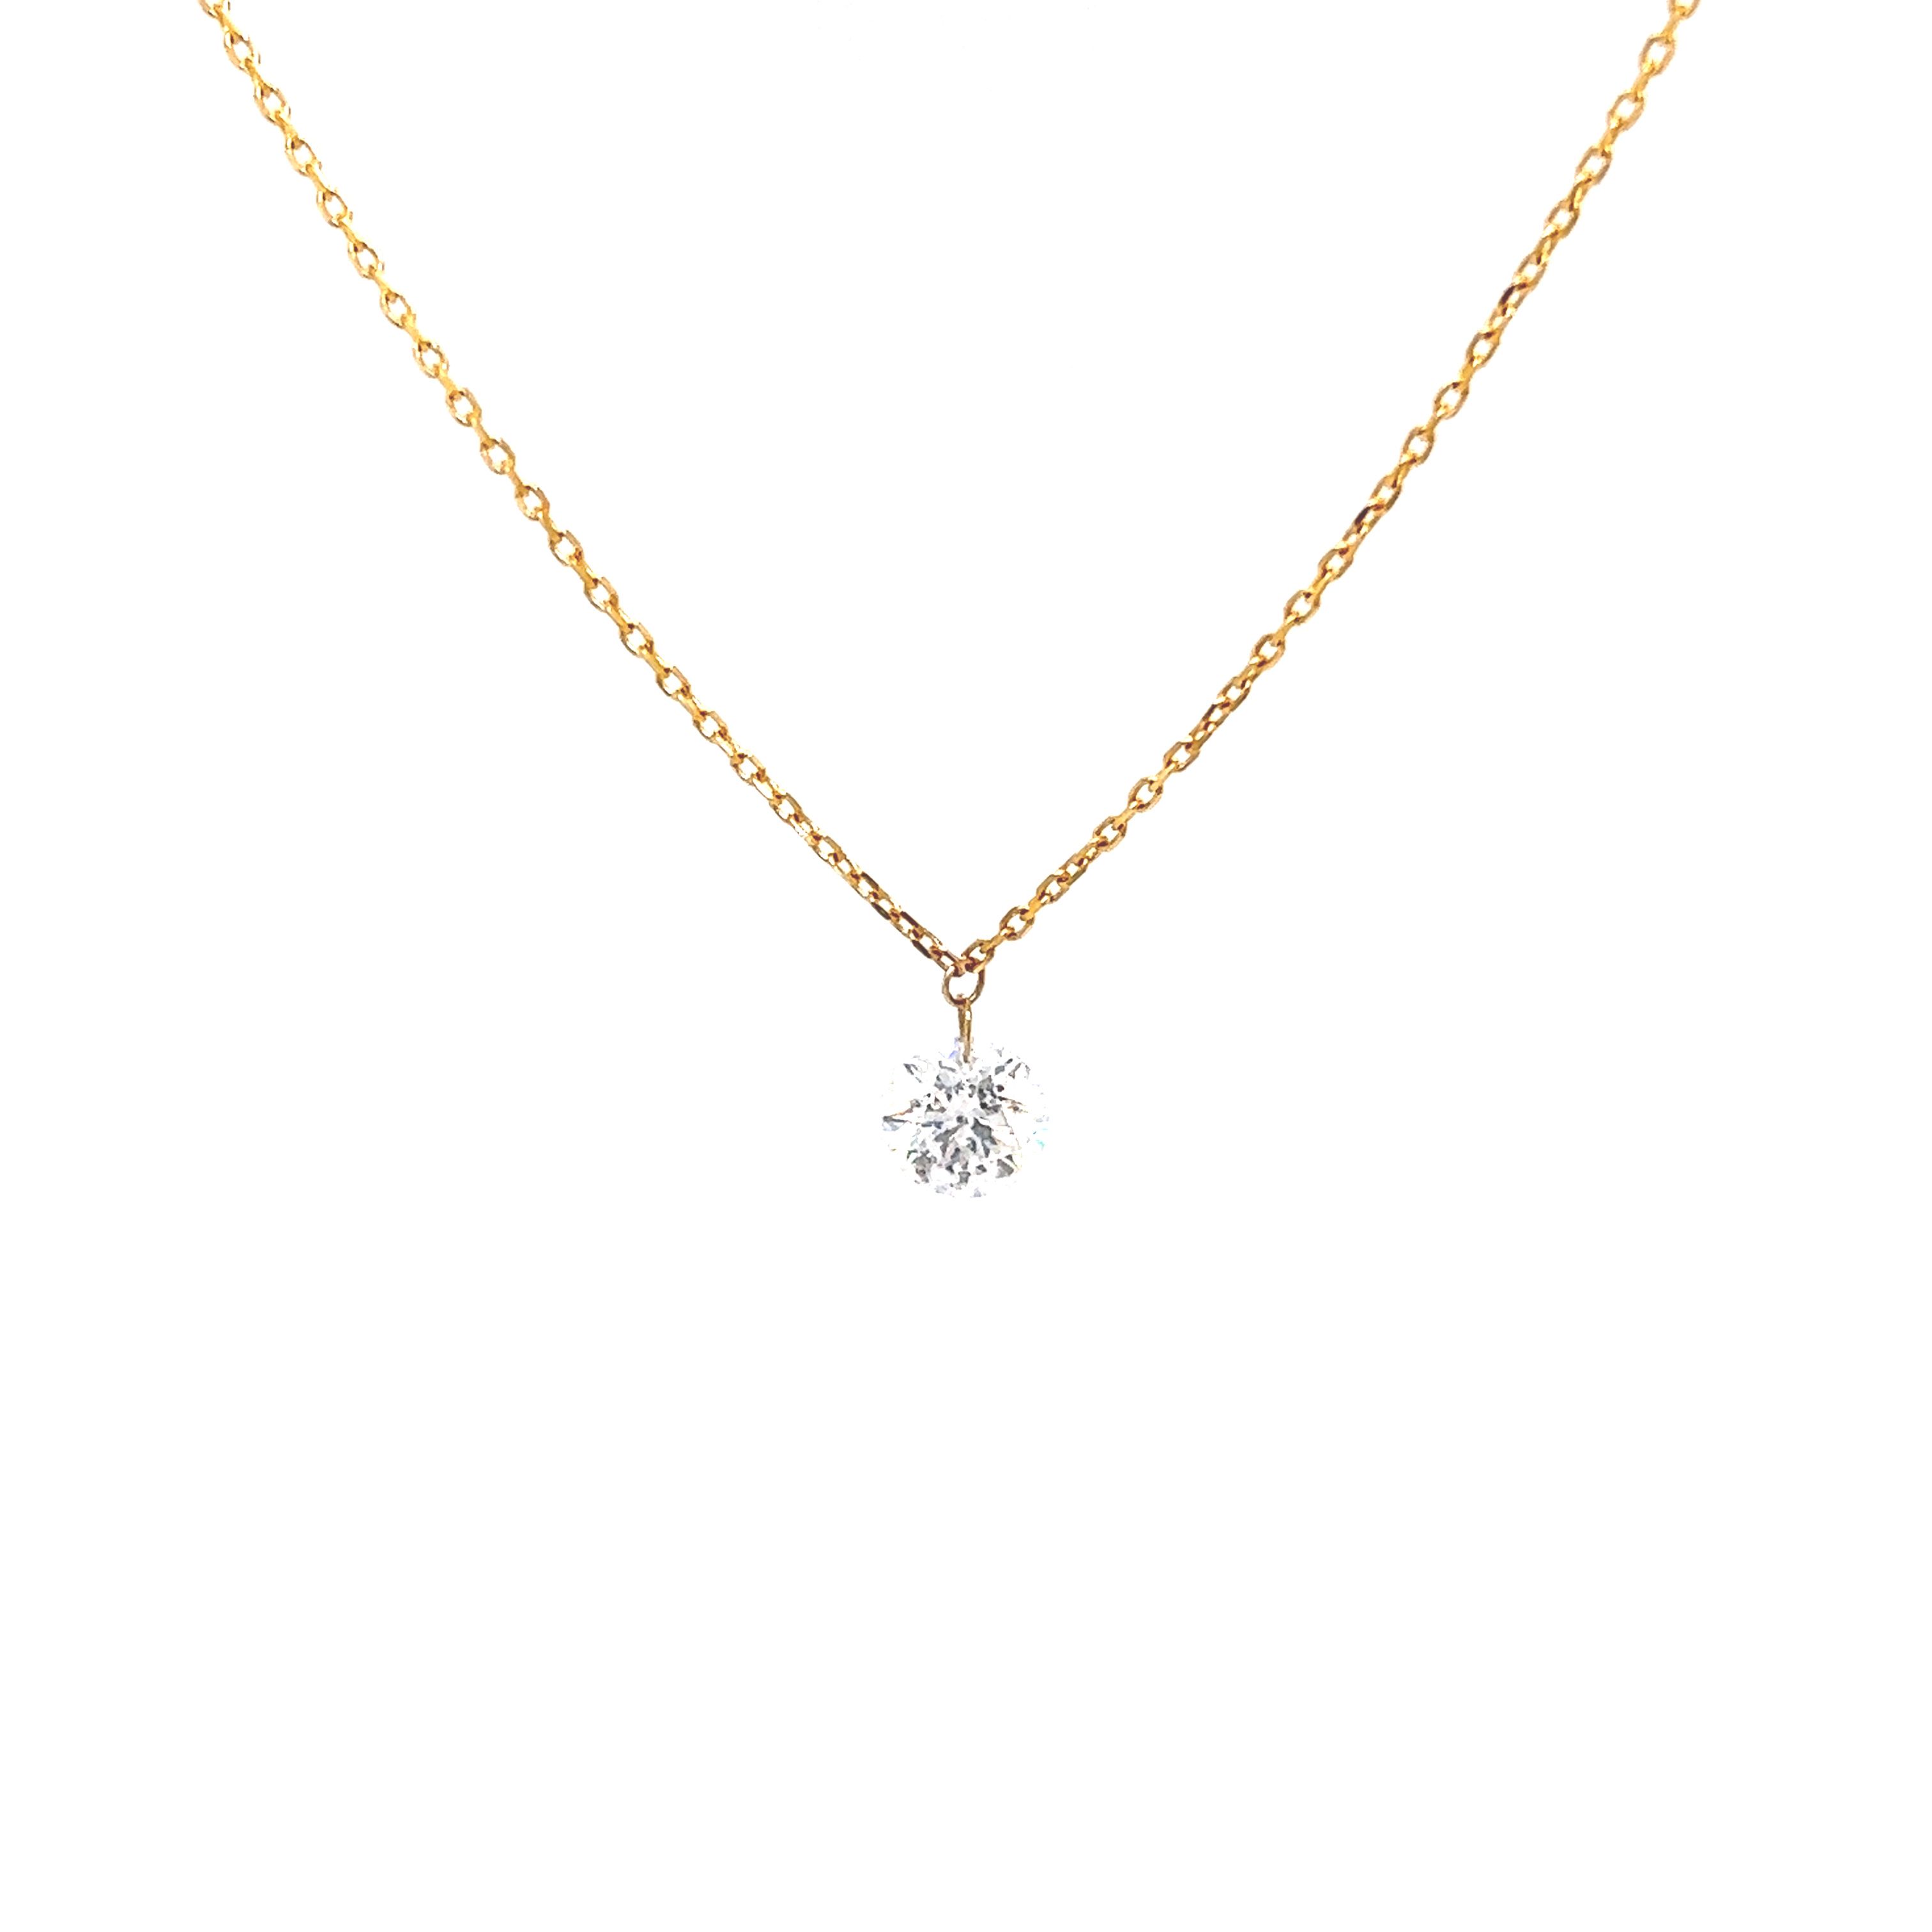 14 Karat yellow gold solitaire necklace with one 0.50ct Round Brilliant G I Diamond